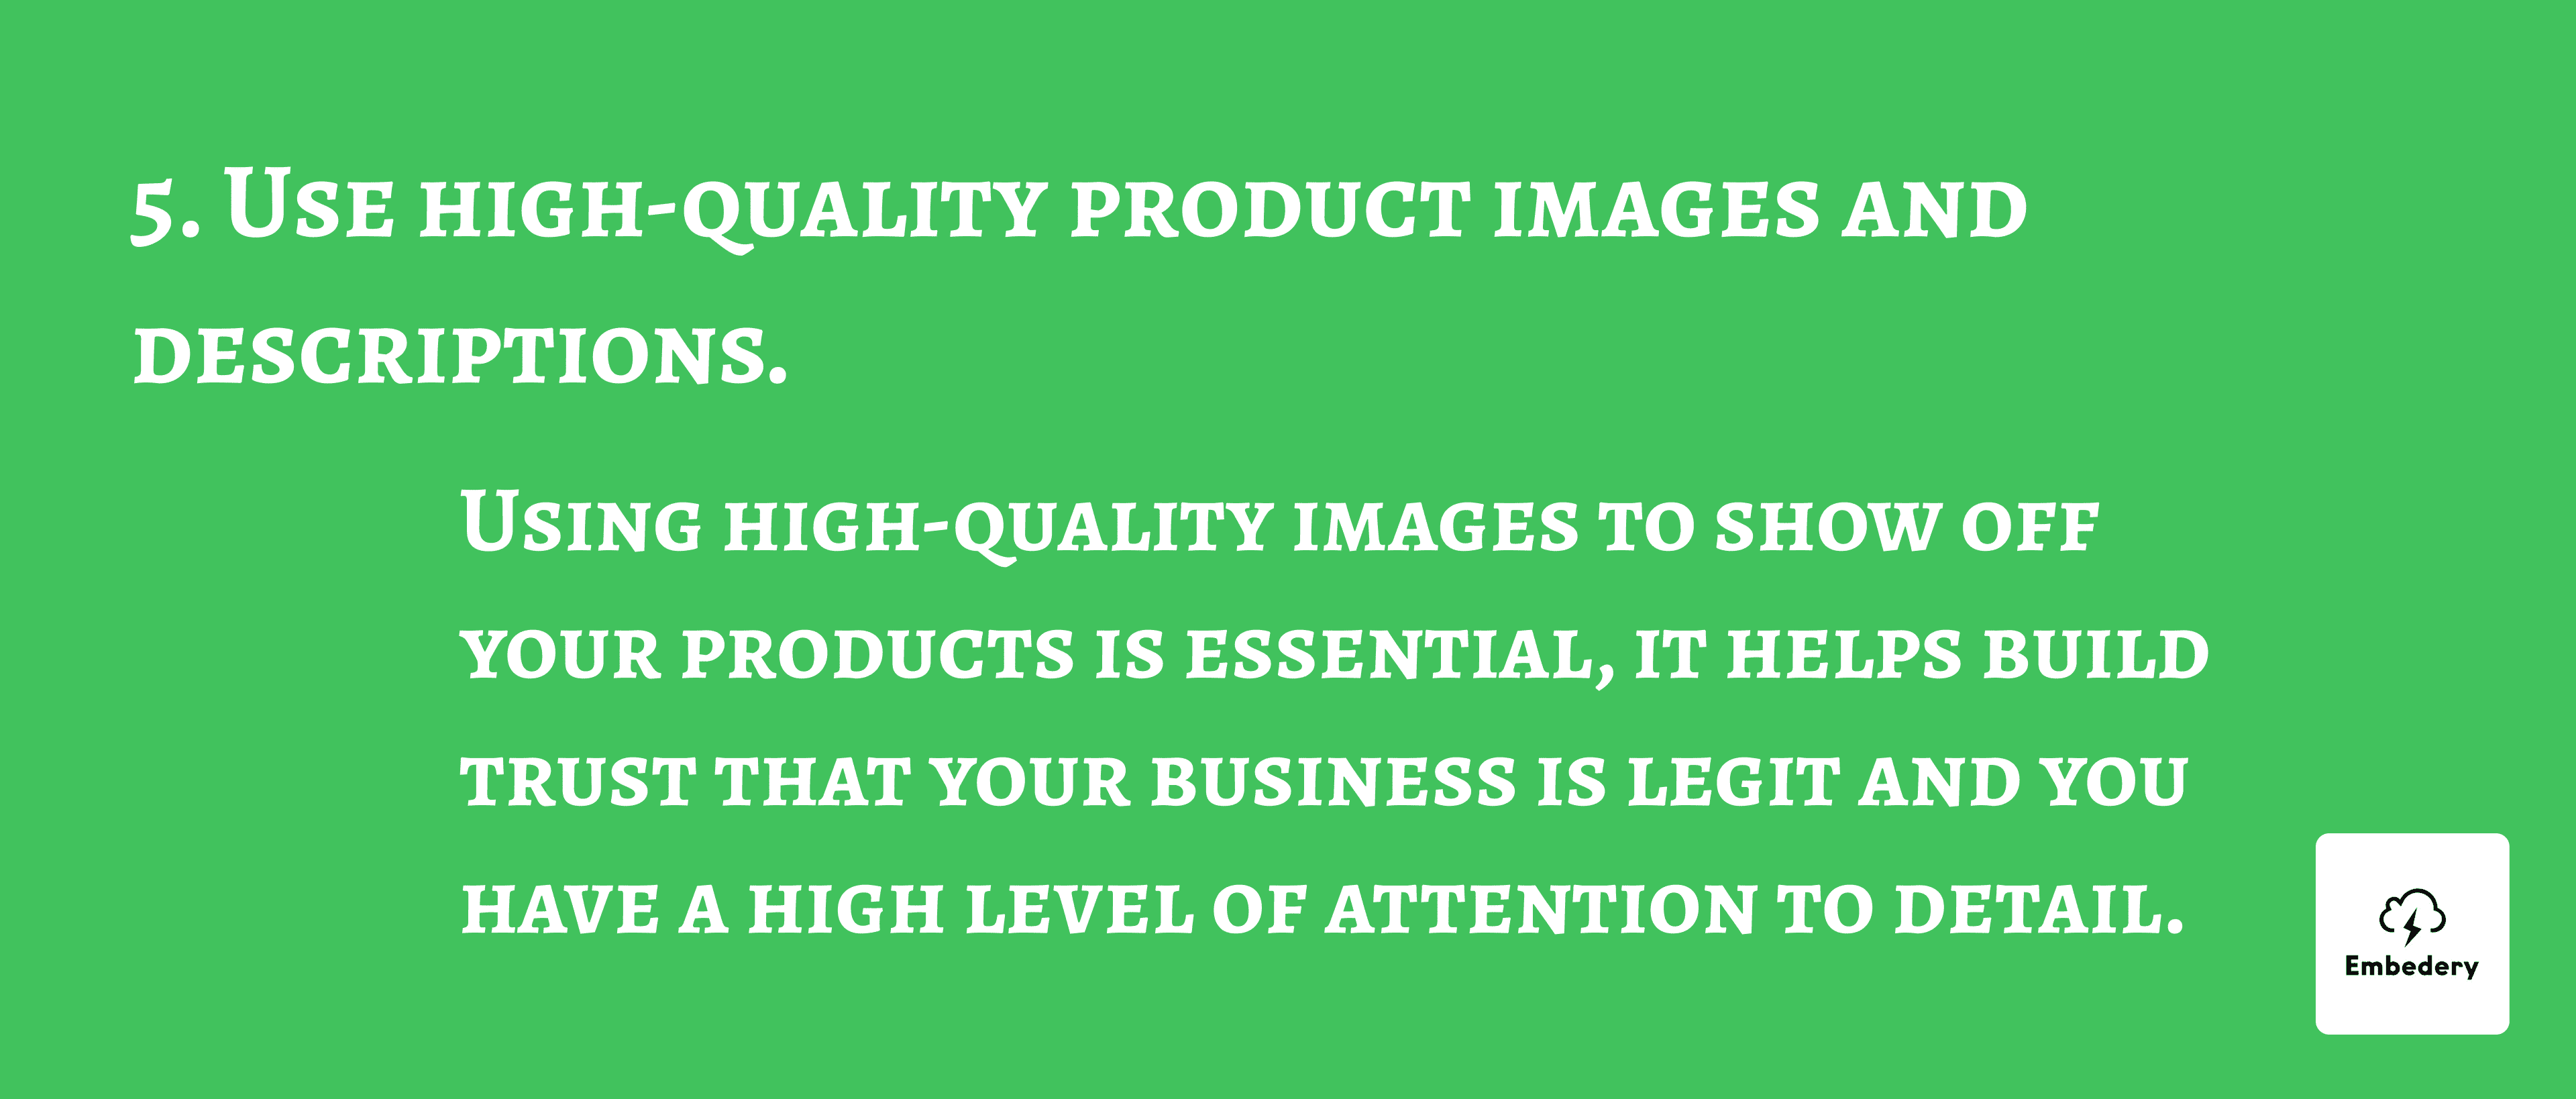 Use high-quality product images and descriptions